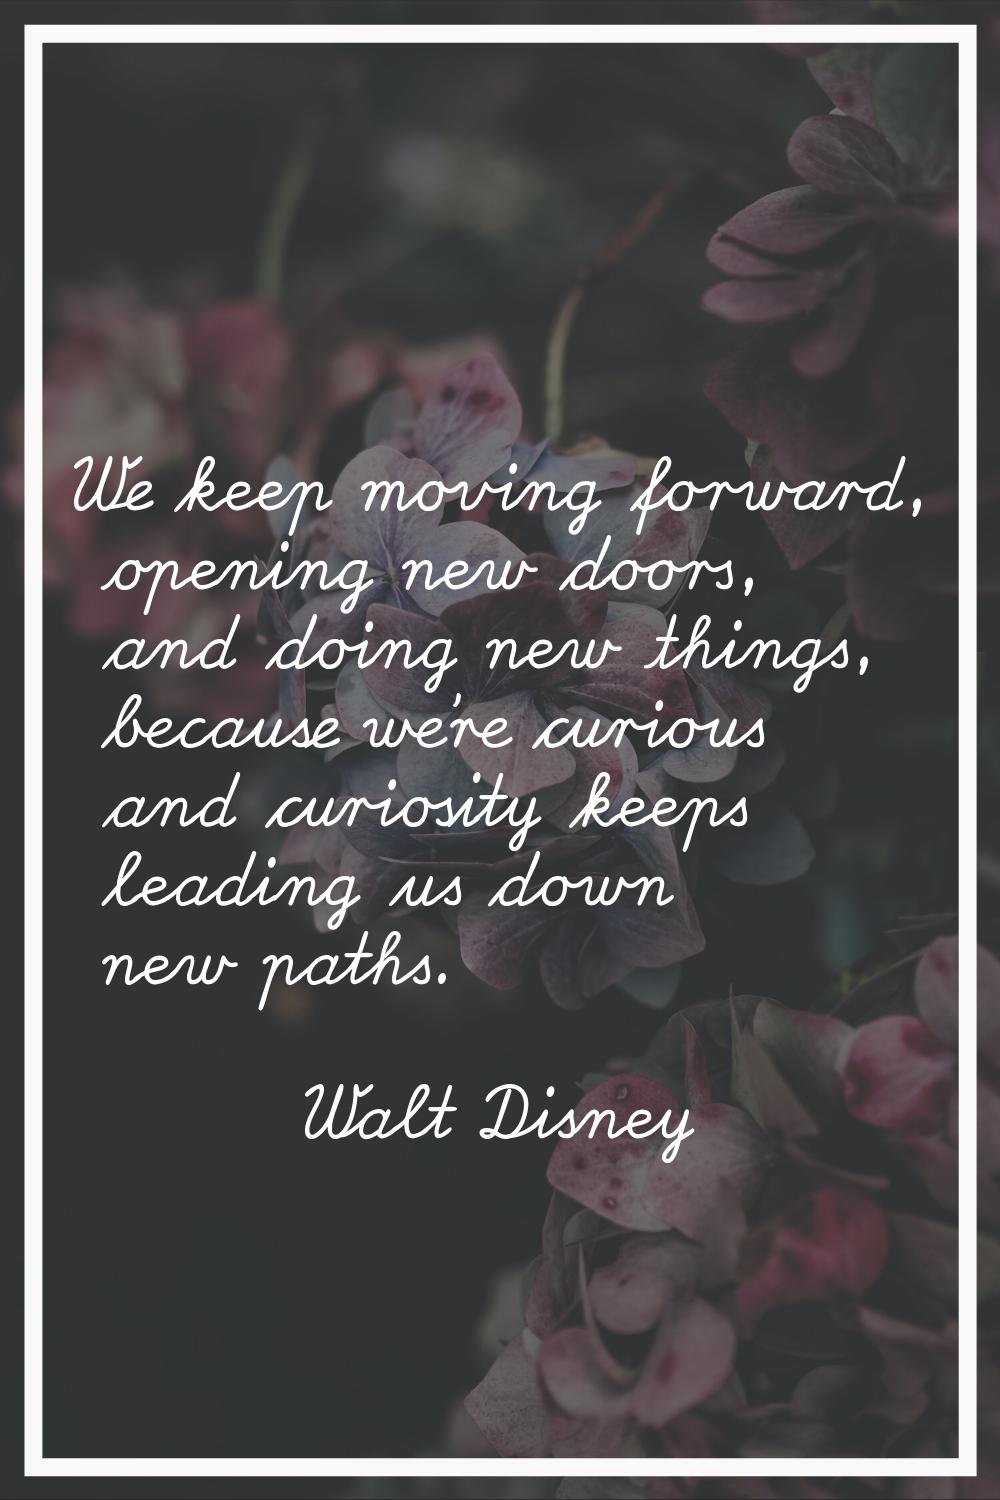 We keep moving forward, opening new doors, and doing new things, because we're curious and curiosit